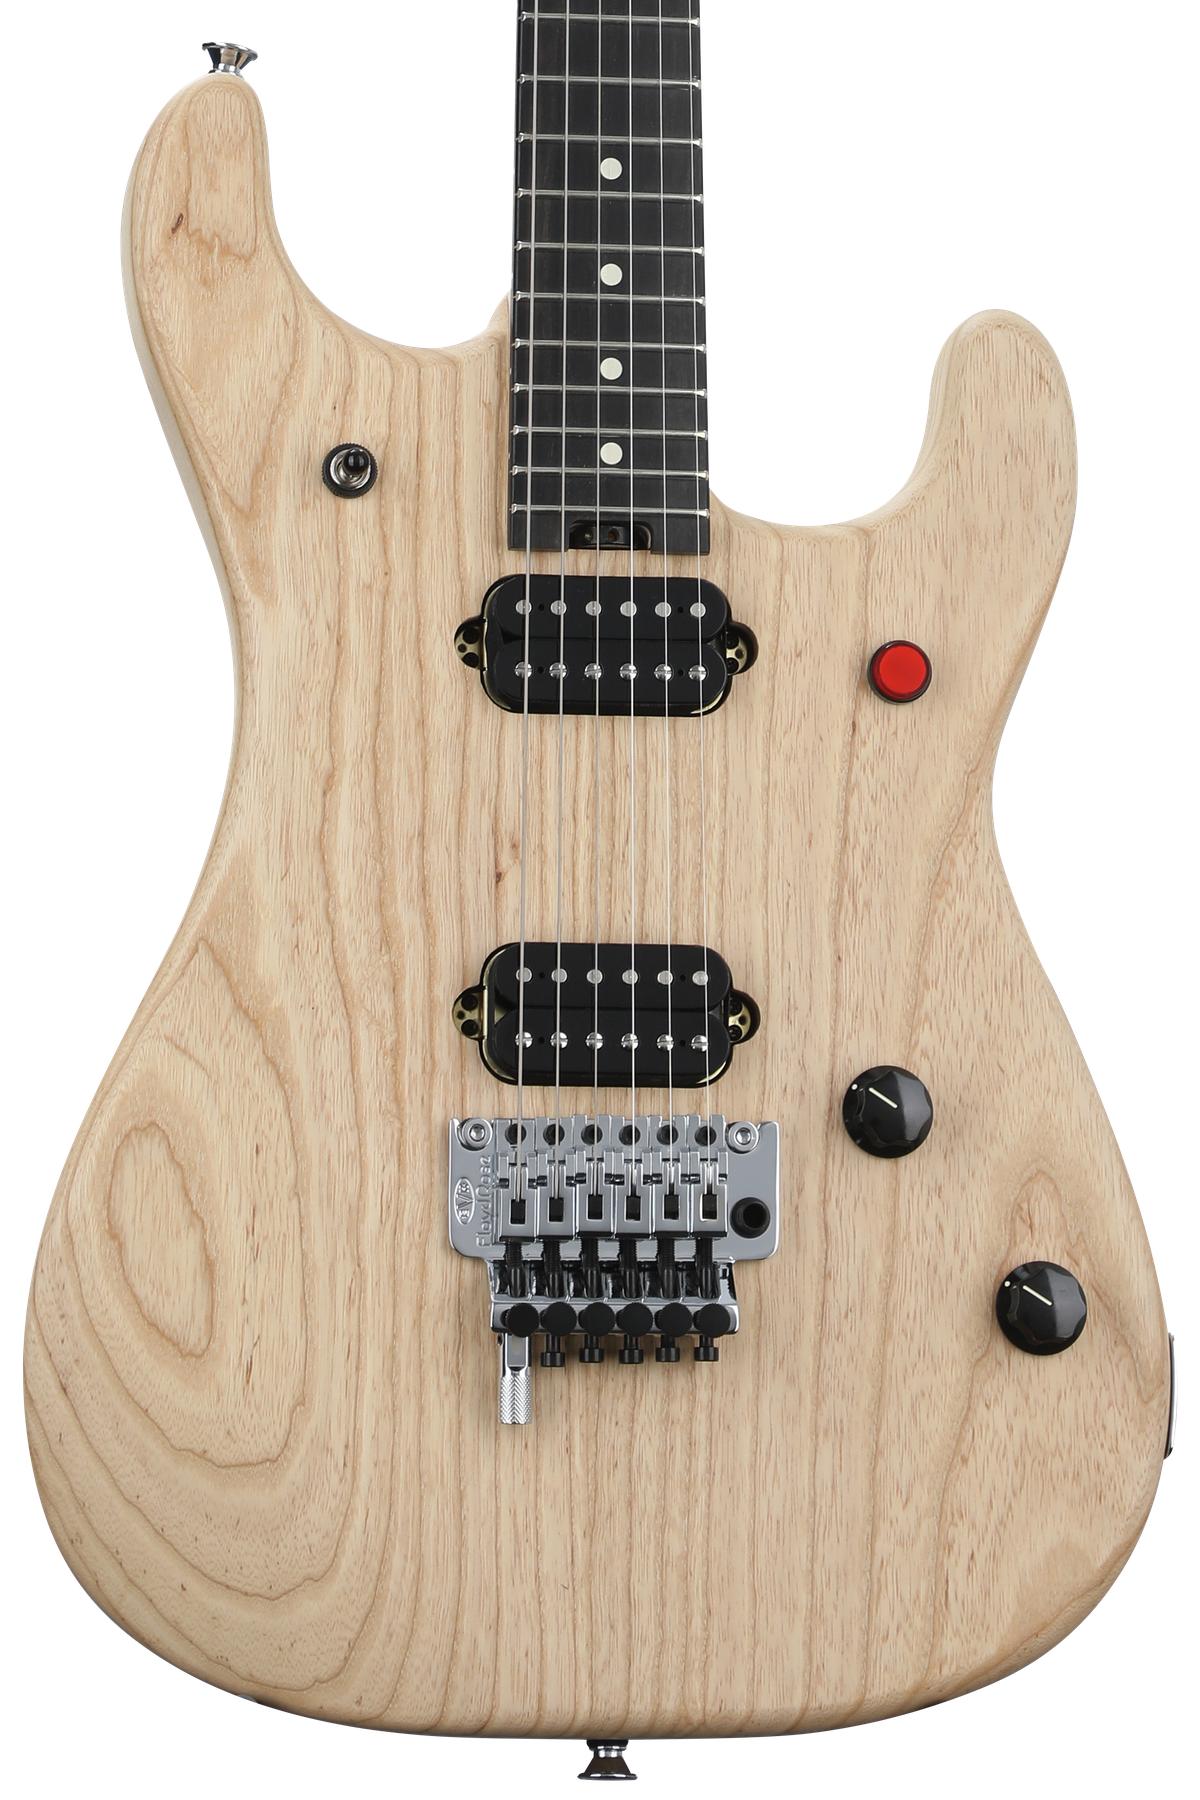 EVH Limited-edition 5150 Deluxe Ash Electric Guitar - Natural